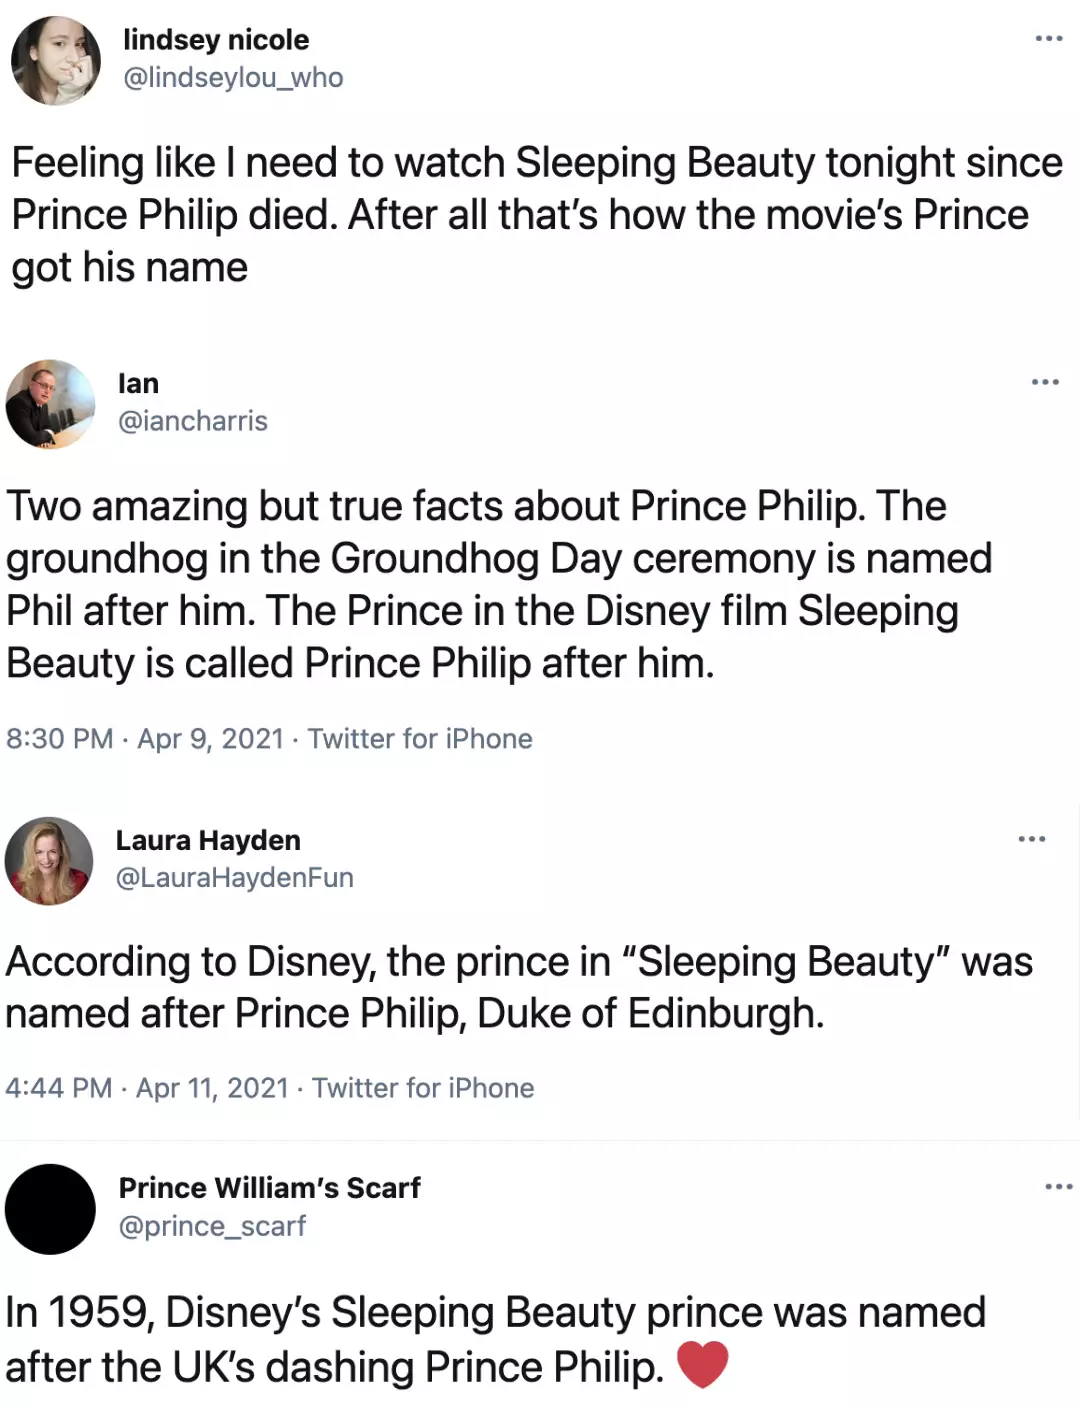 Twitter reacted to the Duke of Edinburgh's death by posting about his alleged influence on the film Sleeping Beauty (